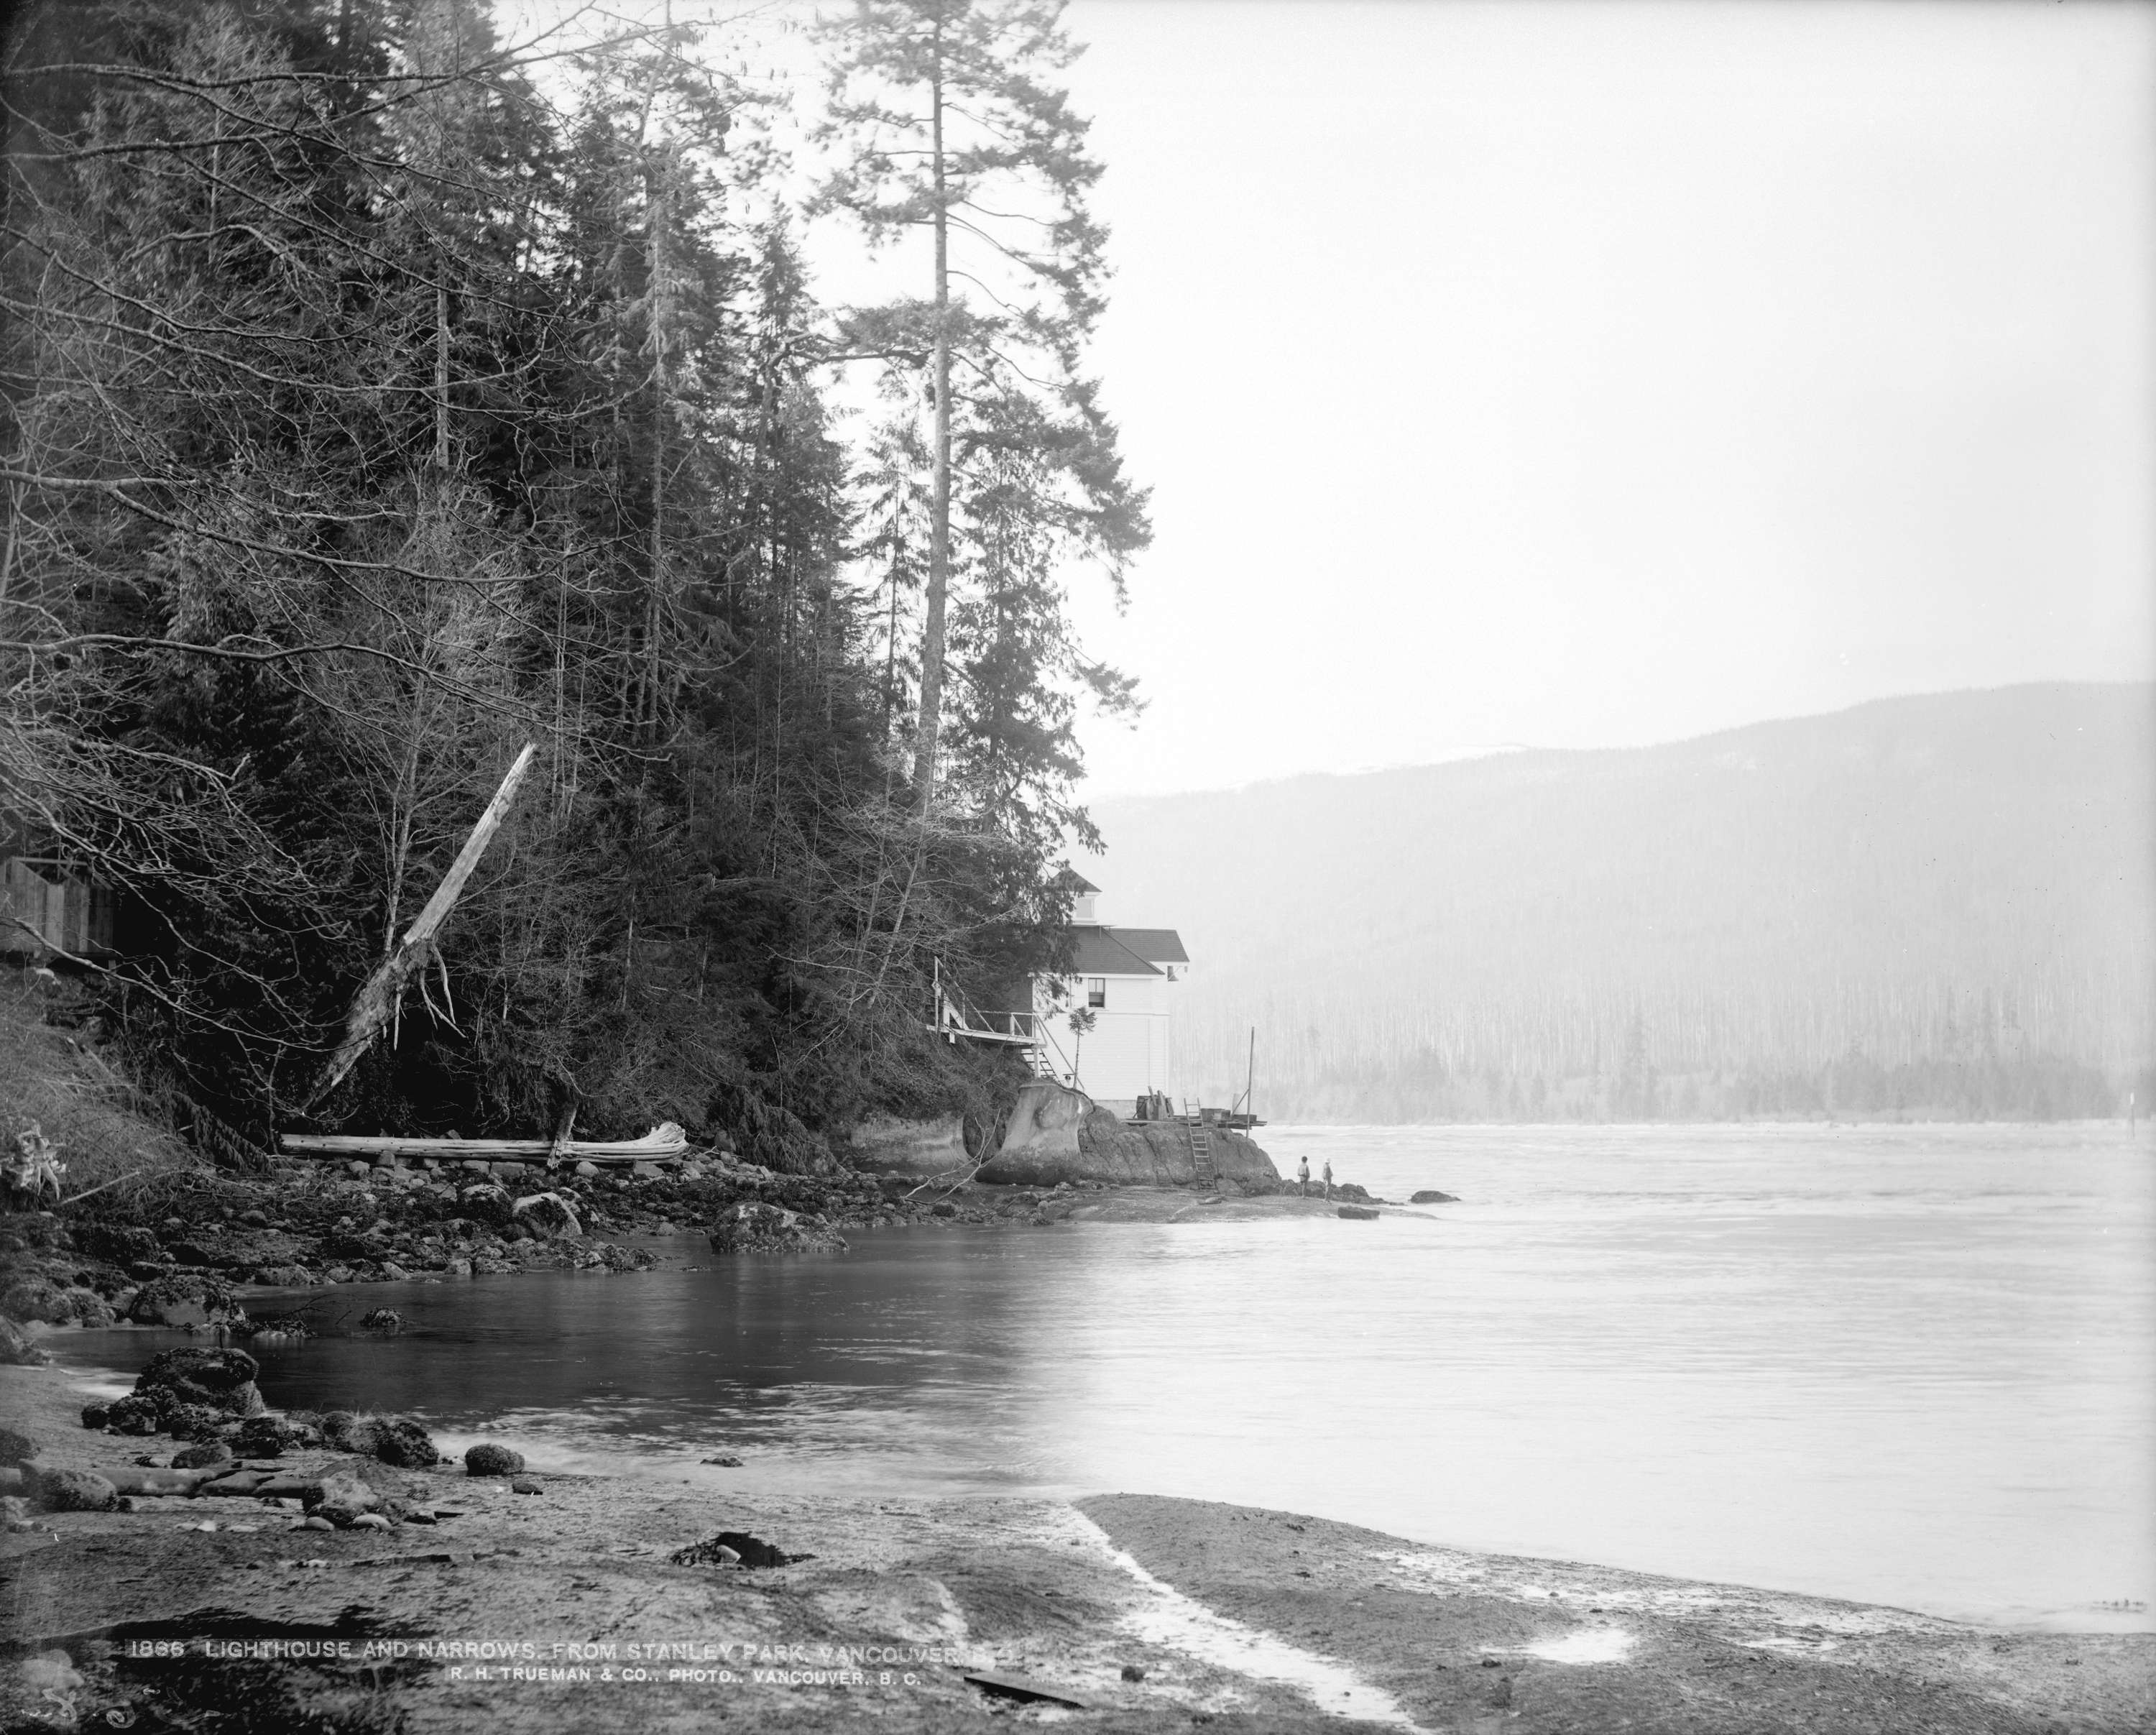 Vancouver wants lighthouse at First Narrows, bridge to Richmond – February 6, 1888